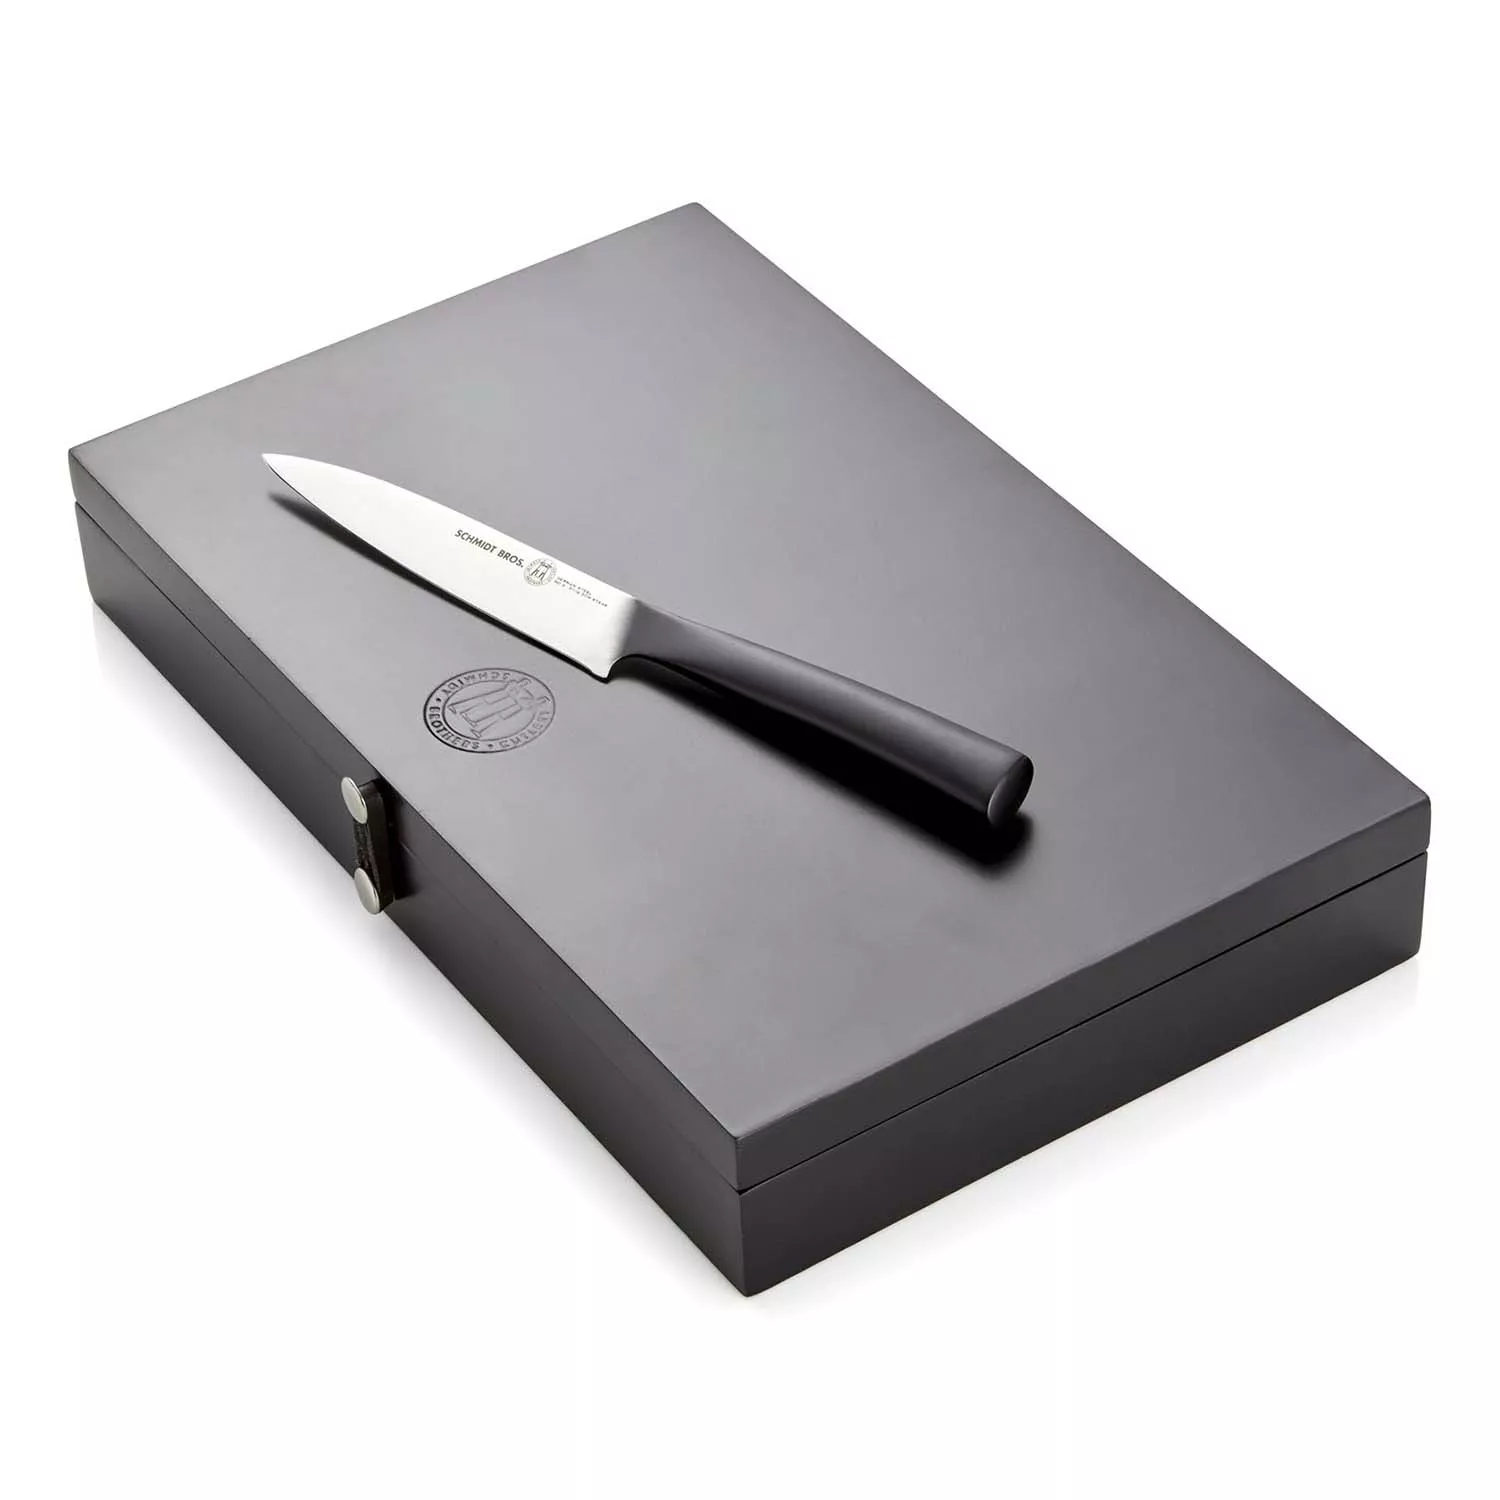 Schmidt Brothers Cutlery Heritage Series Chef Knife, 6